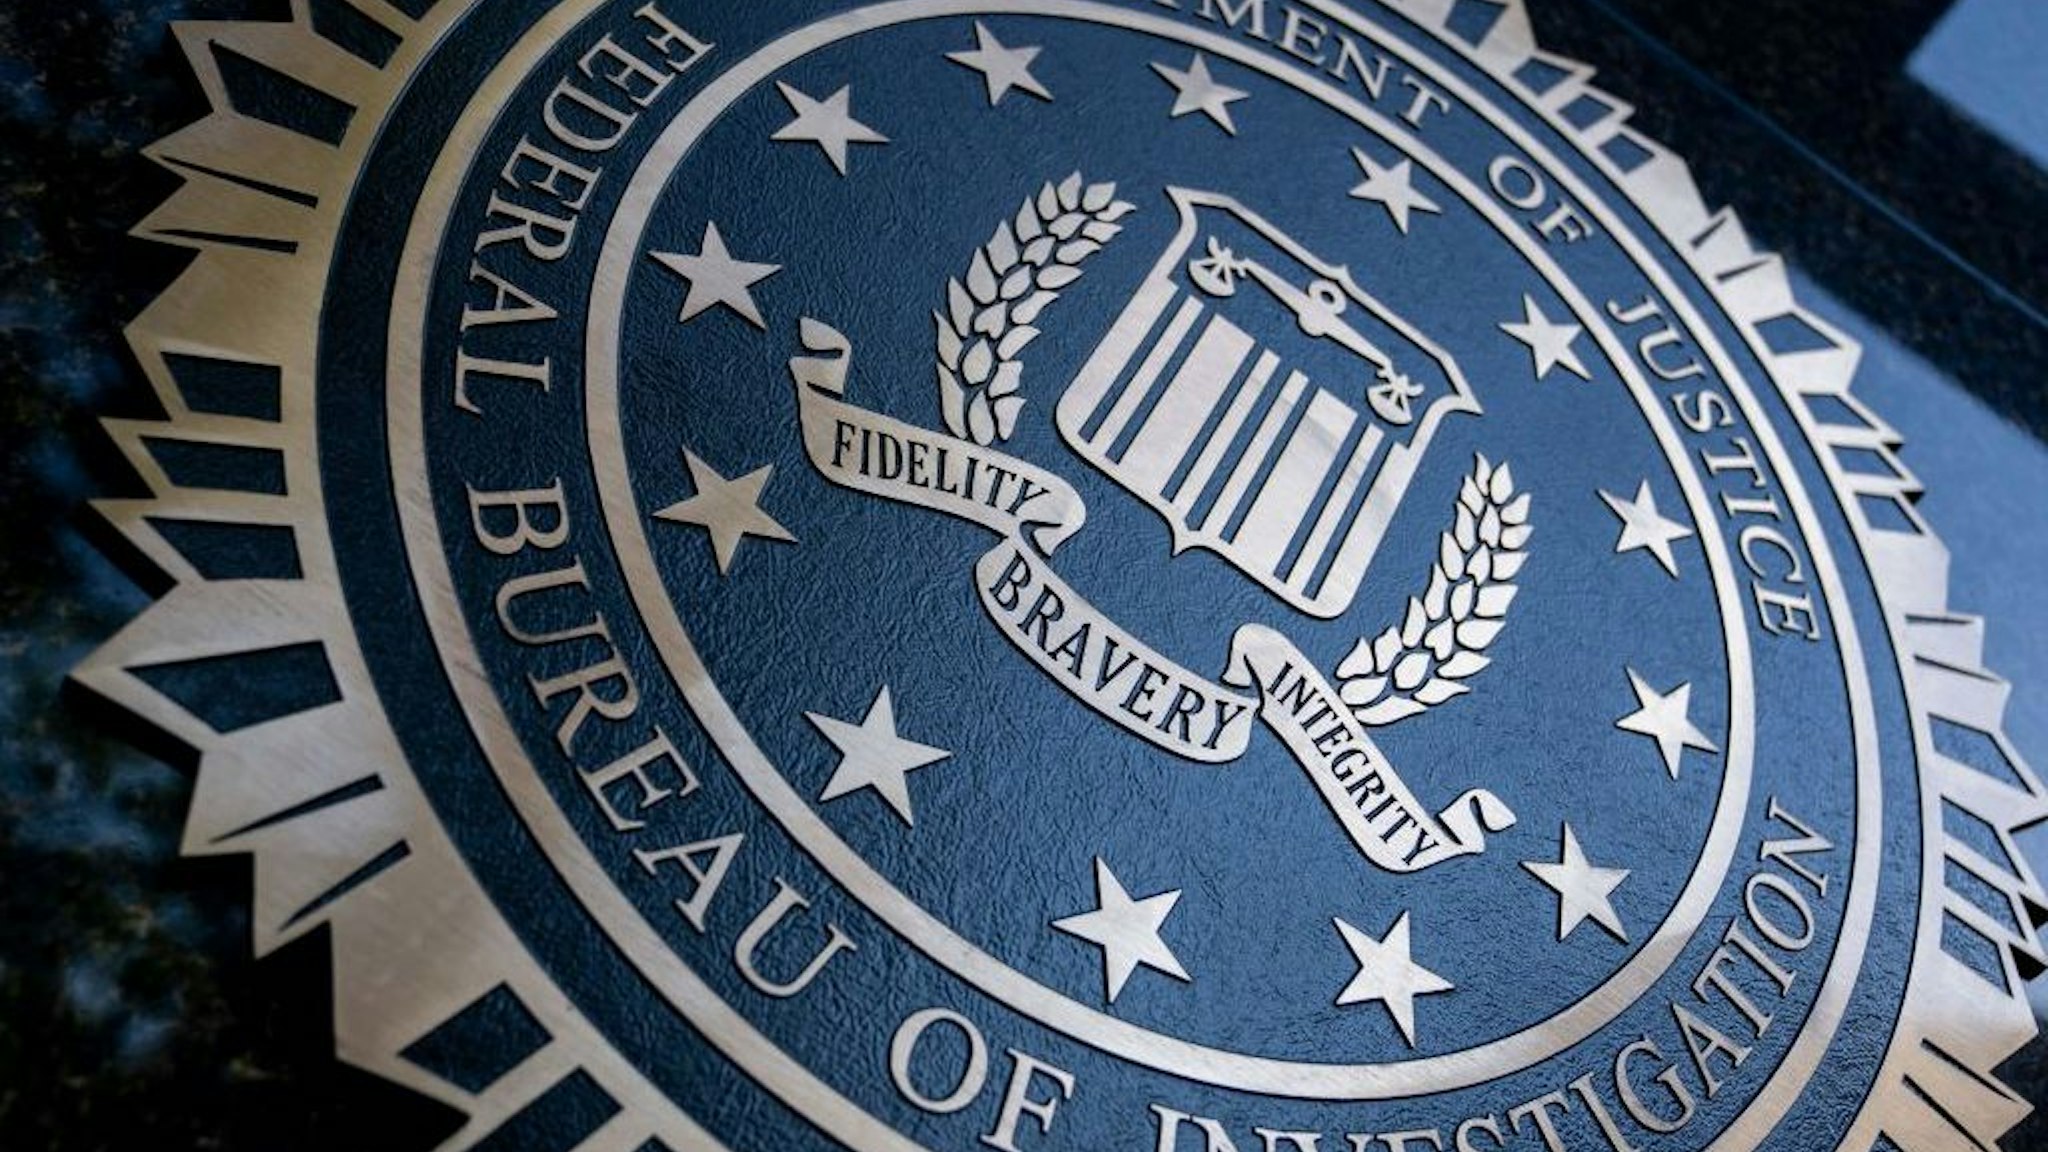 A seal reading "Department of Justice Federal Bureau of Investigation" is displayed on the J. Edgar Hoover FBI building in Washington, DC, o August 9, 2022. (Photo by Stefani Reynolds / AFP) (Photo by STEFANI REYNOLDS/AFP via Getty Images)